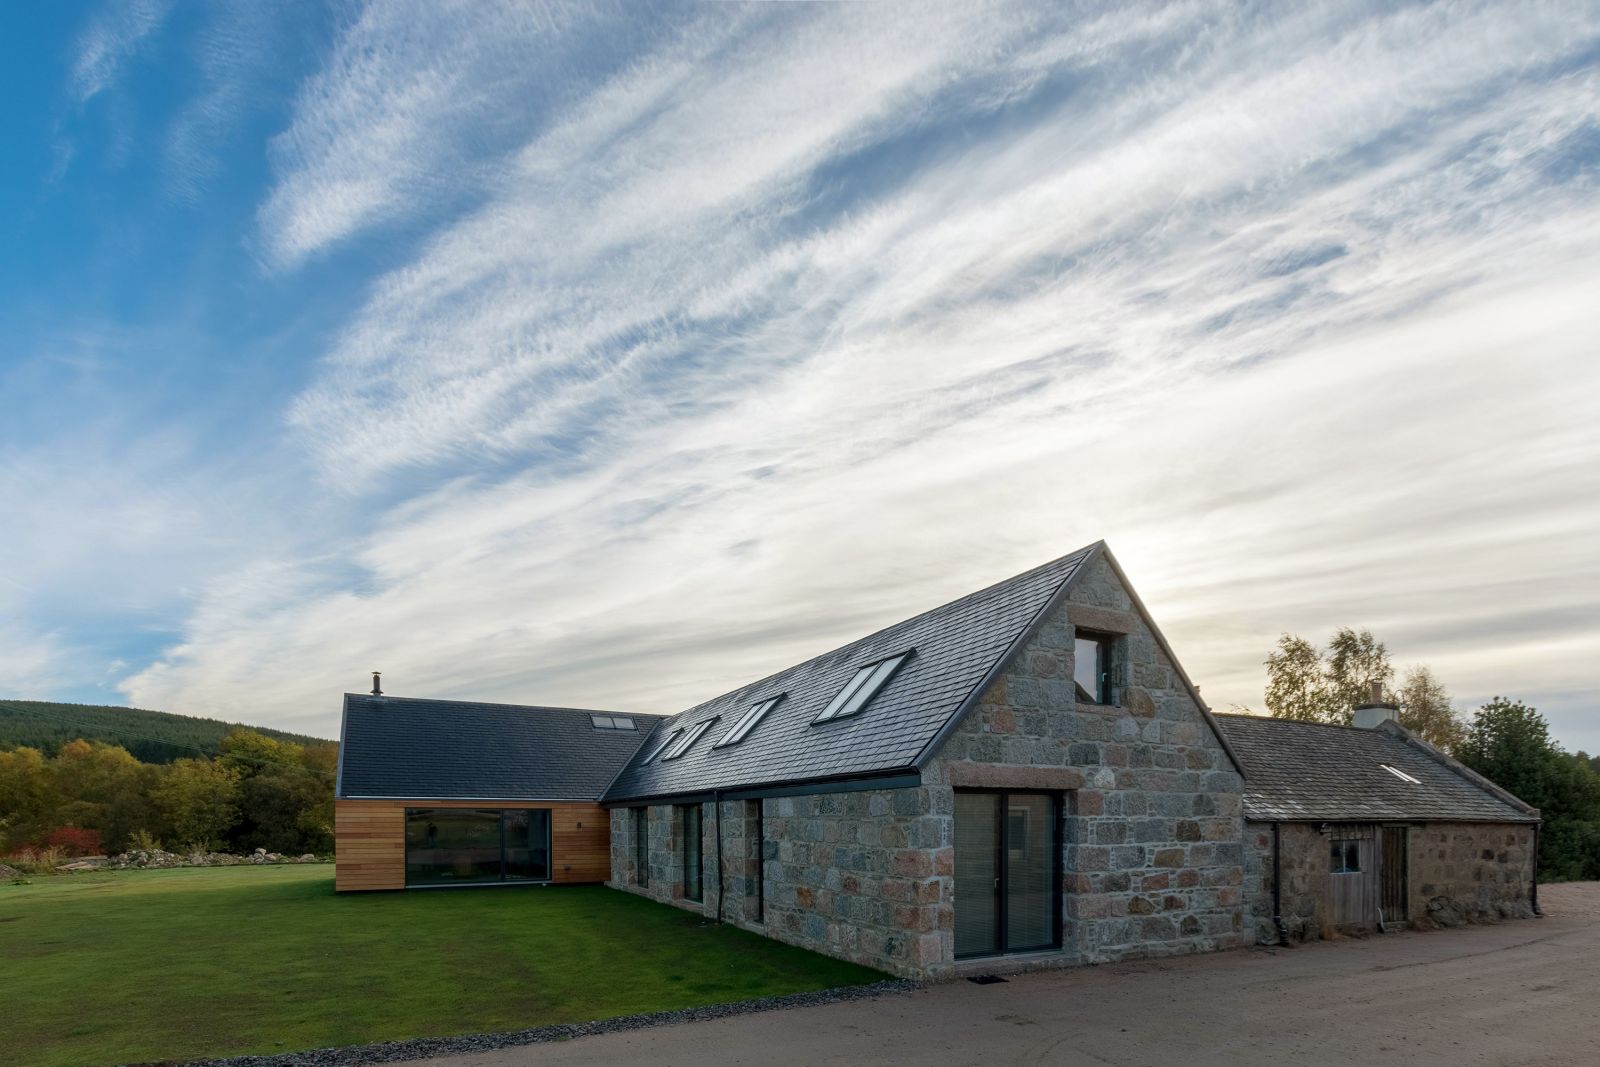 Bespoke architechtural project by Dualchas in Aberdeenshire